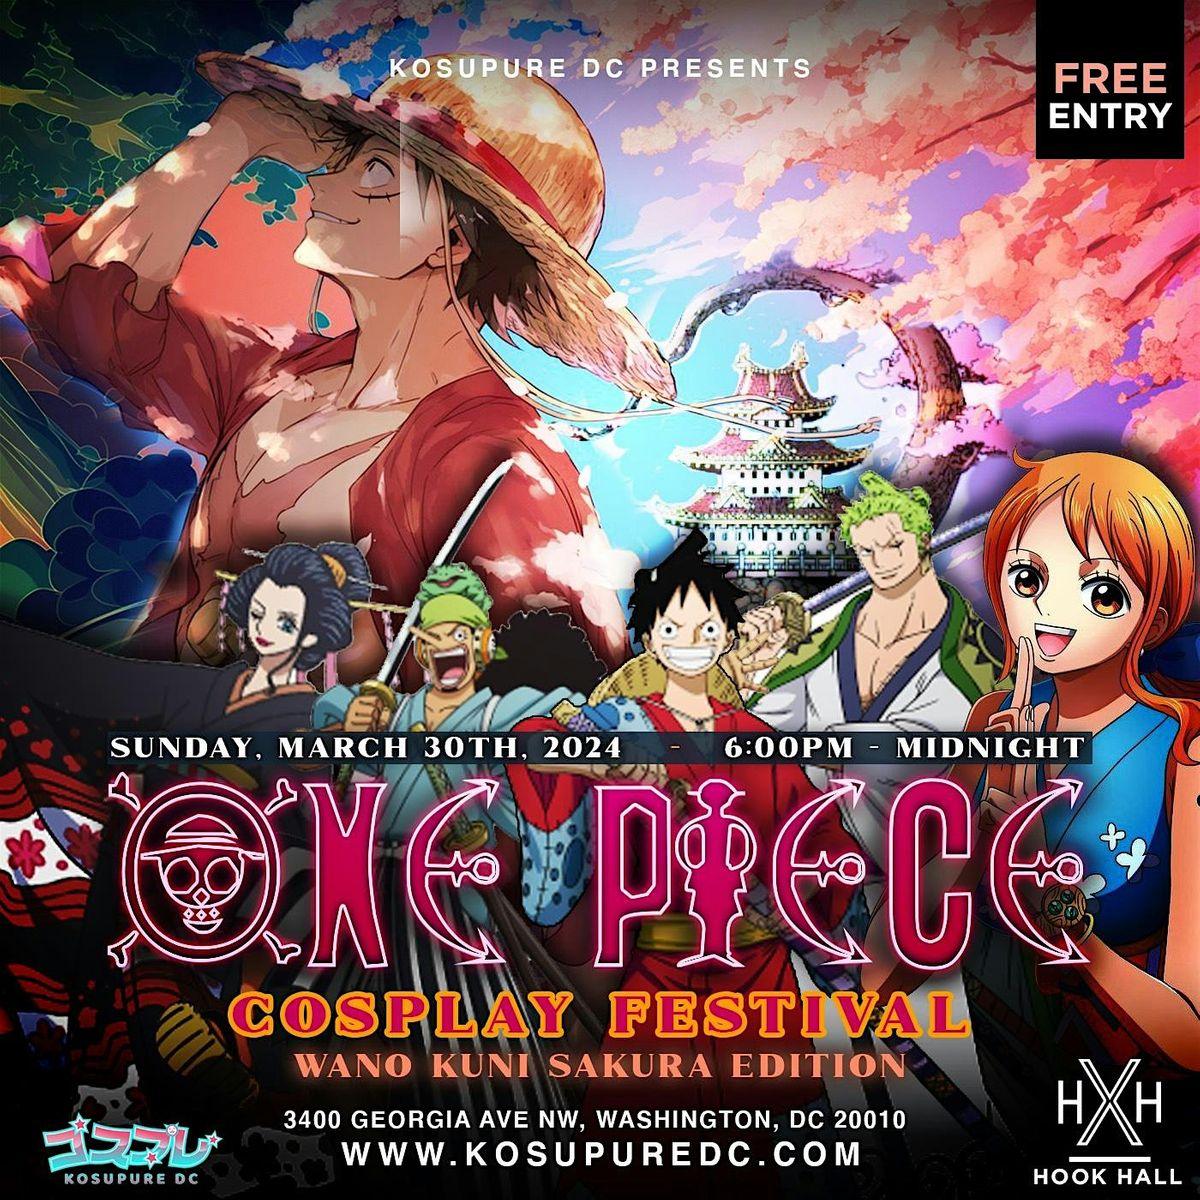 Free One Piece Cosplay Festival!